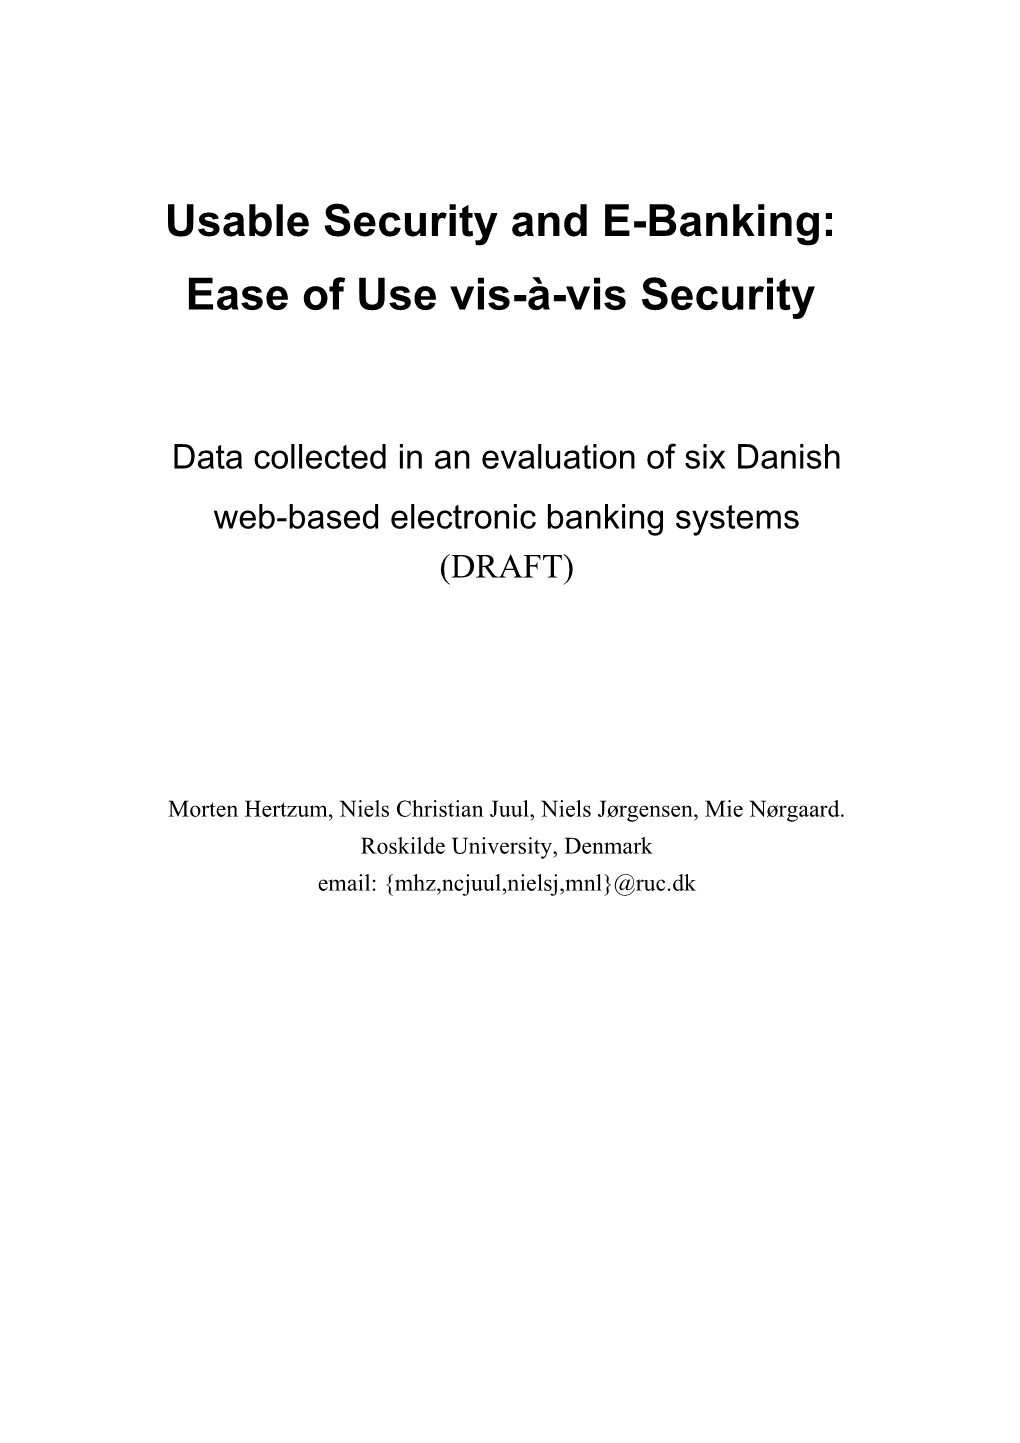 Usable Security and E-Banking: Ease of Use Vis-À-Vis Security